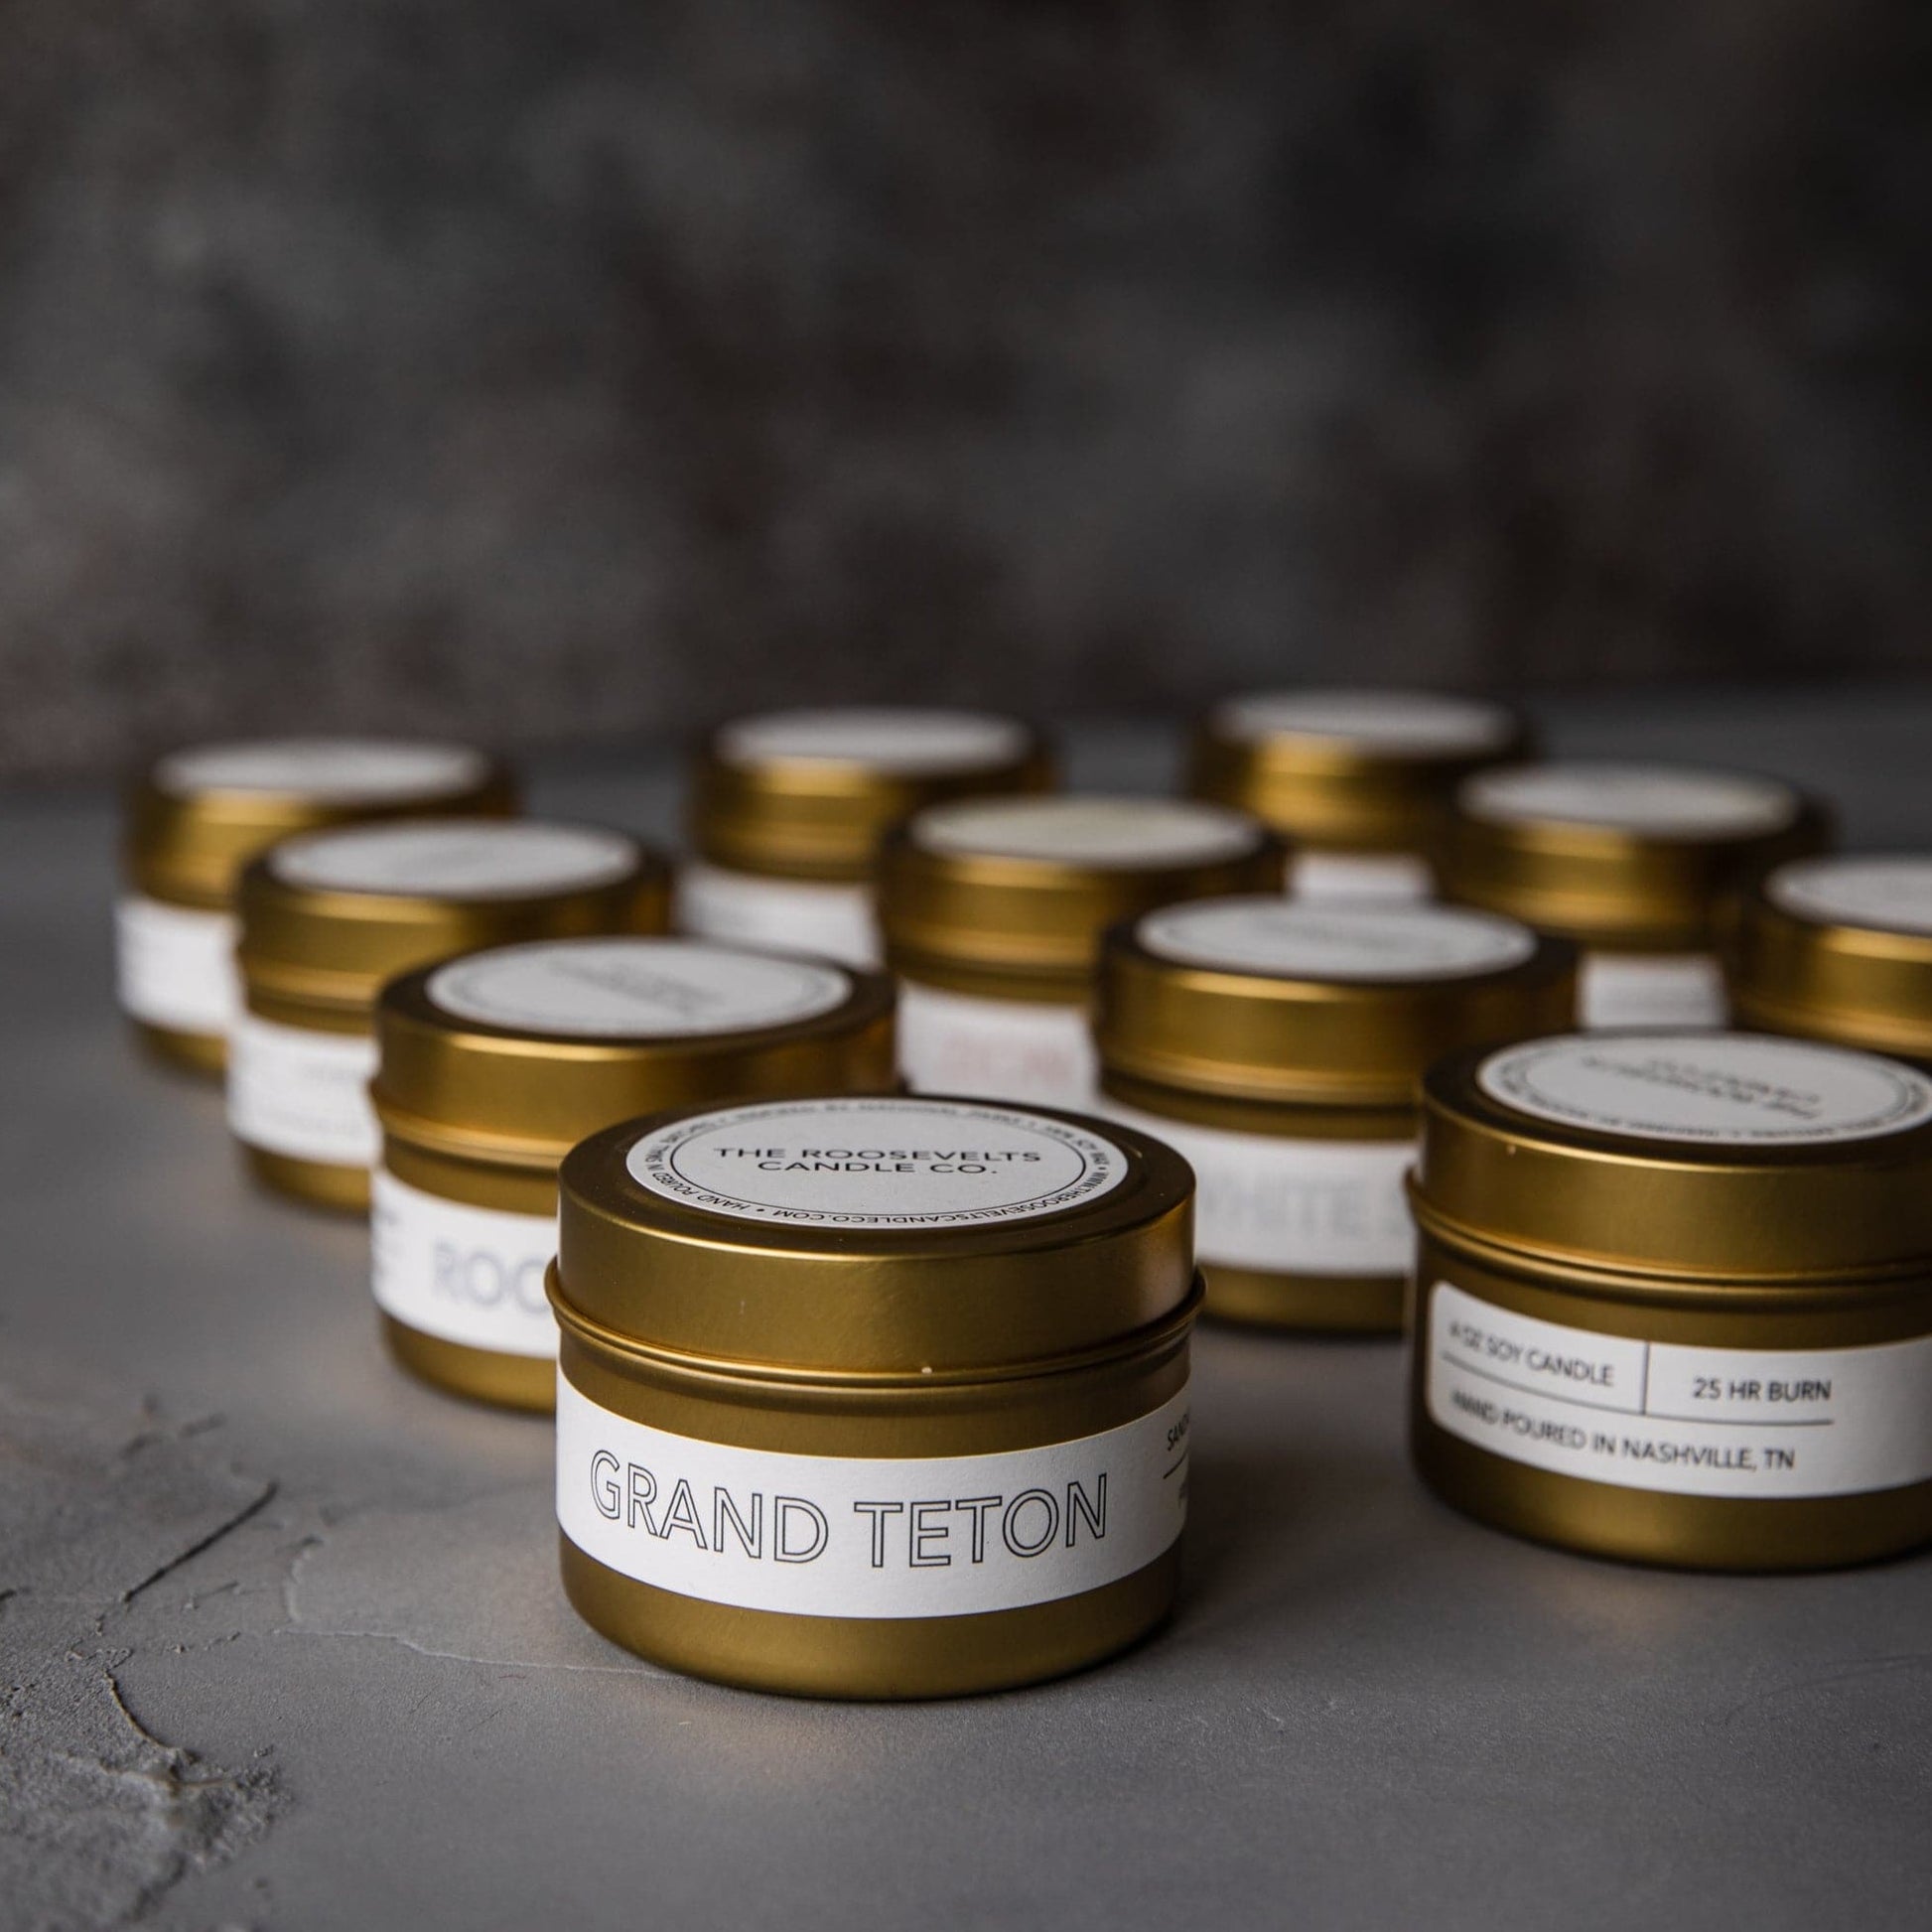 Grand Teton travel candle - the roosevelts candle co